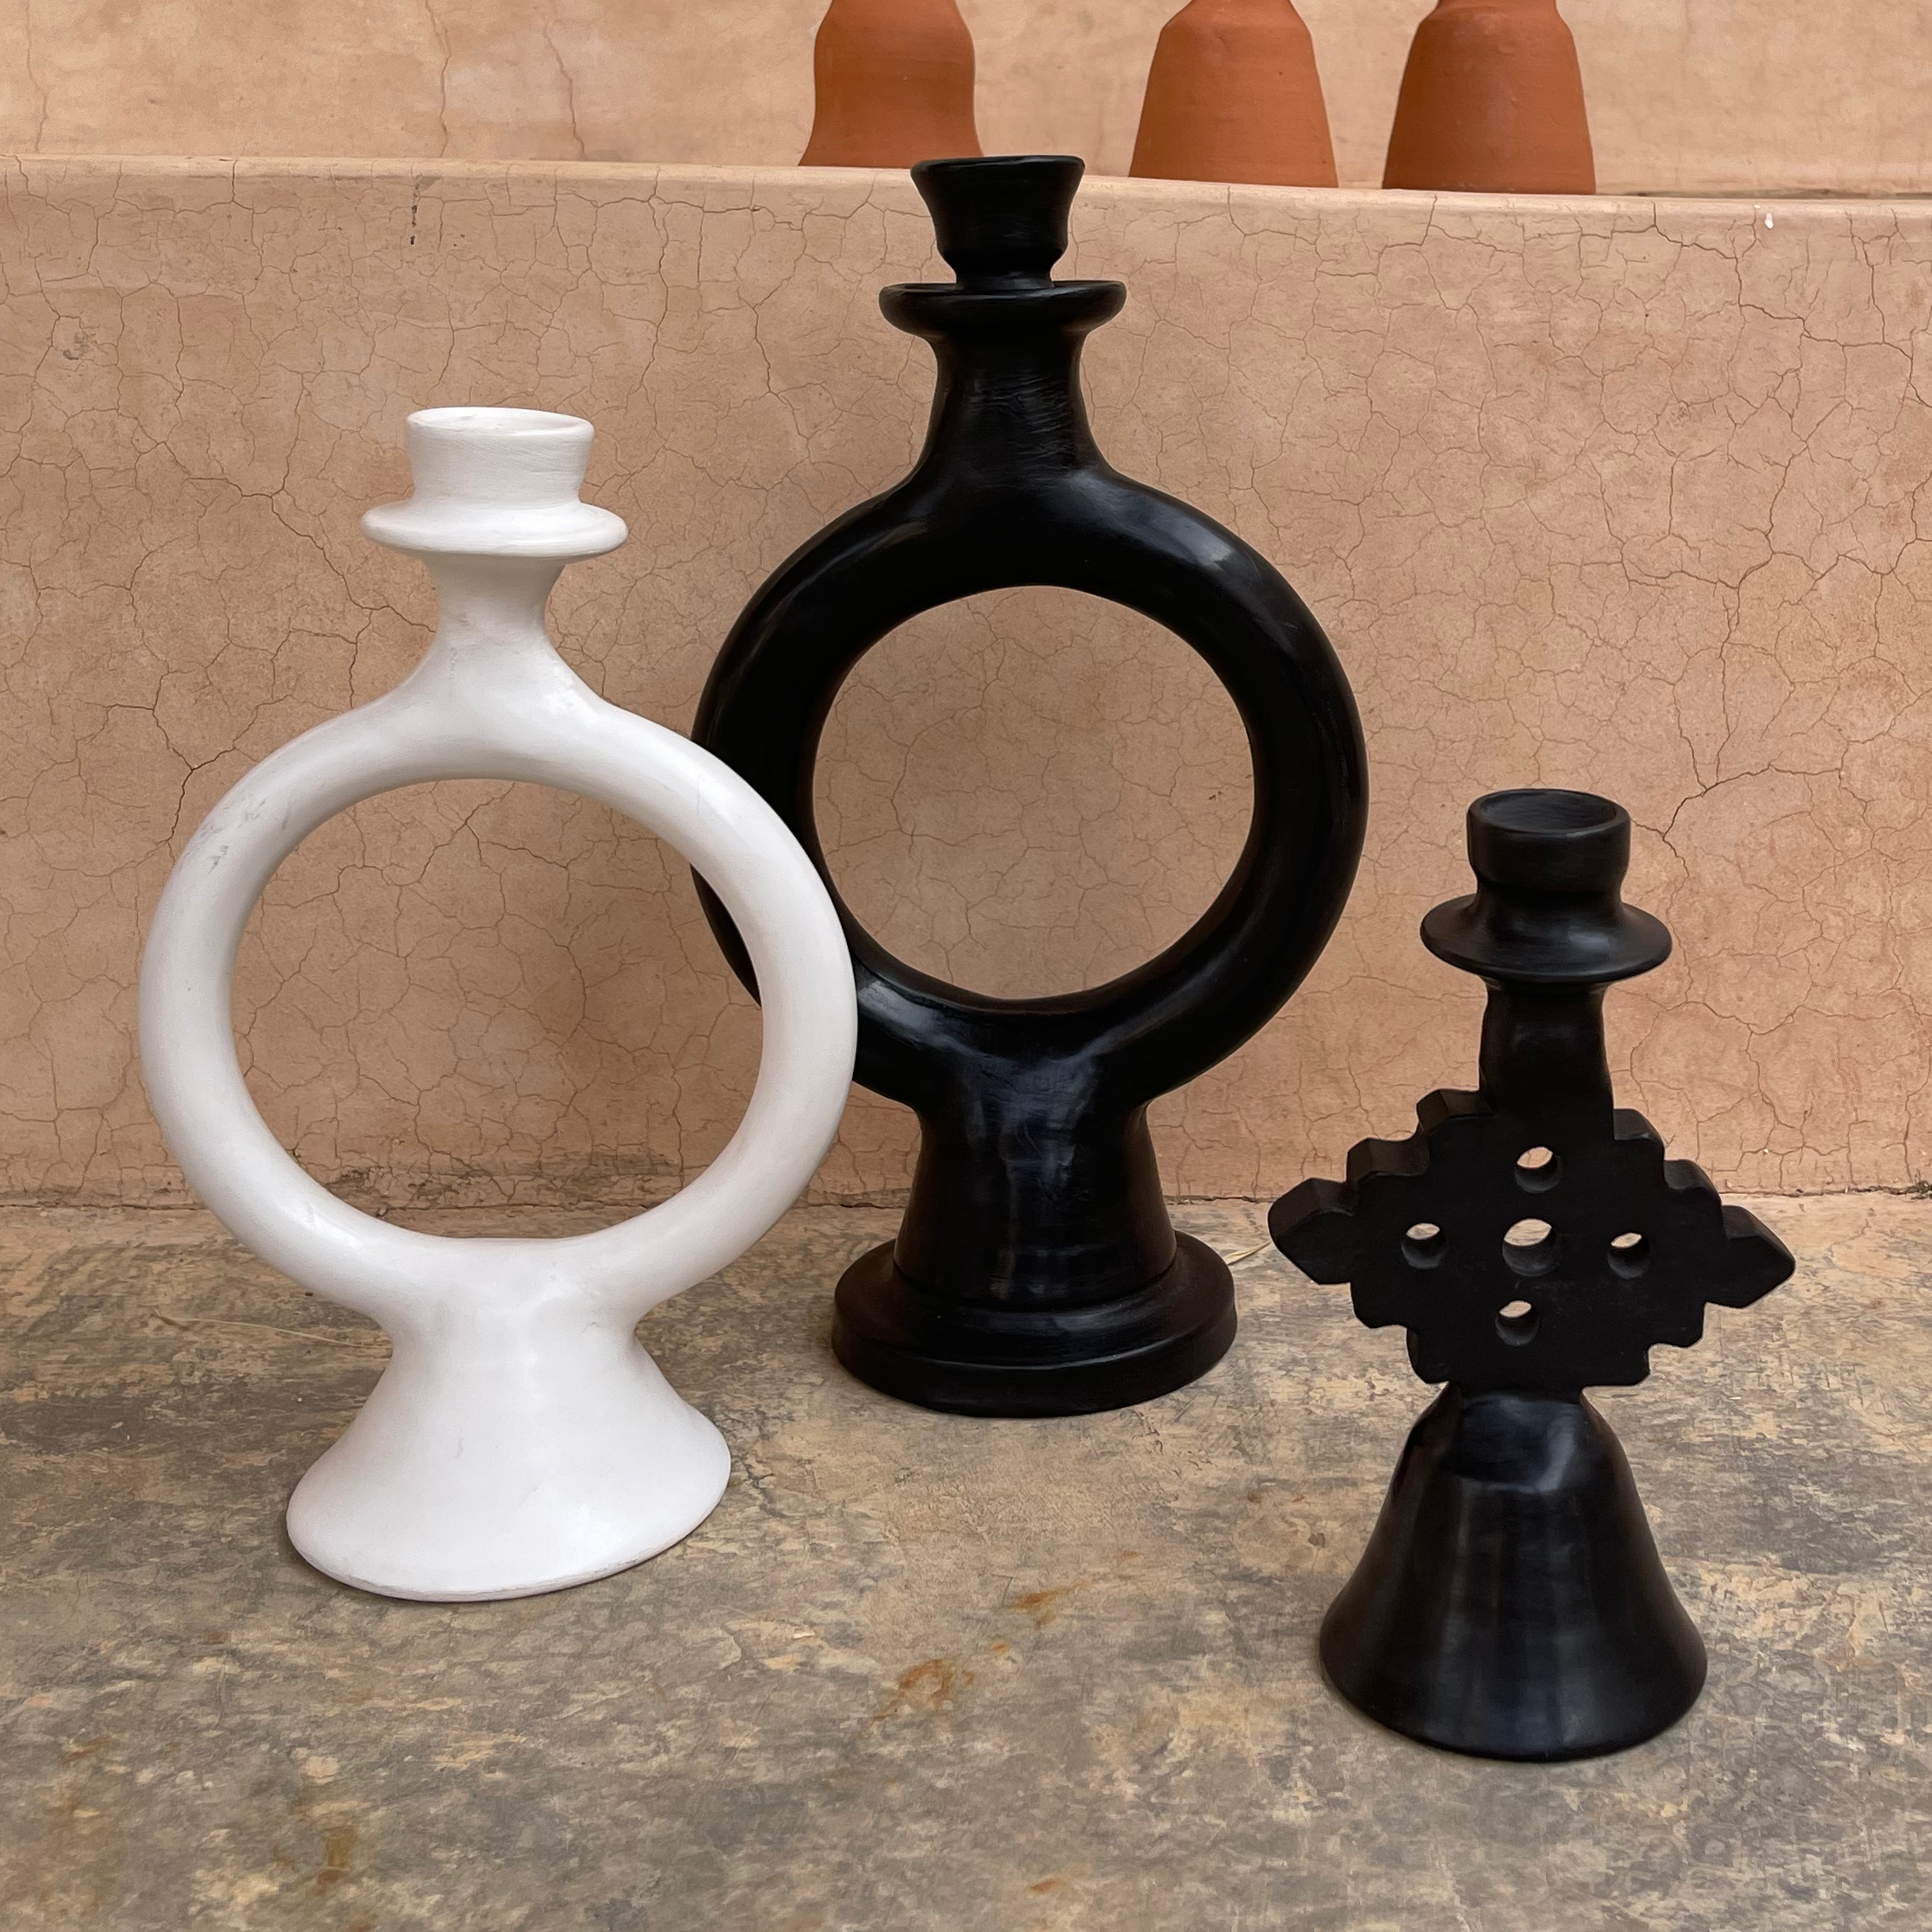 Moroccan Glazed Terracotta Candle Holders Candle Holders Une Vie Nomade Brand_Une Vie Nomade Home_Candles & Accessories Home_Decor New Arrivals Une Vie Nomade IMG_1764-2-Moroccan-Terracotta-Glazed-Black-and-White-Candle-Holders